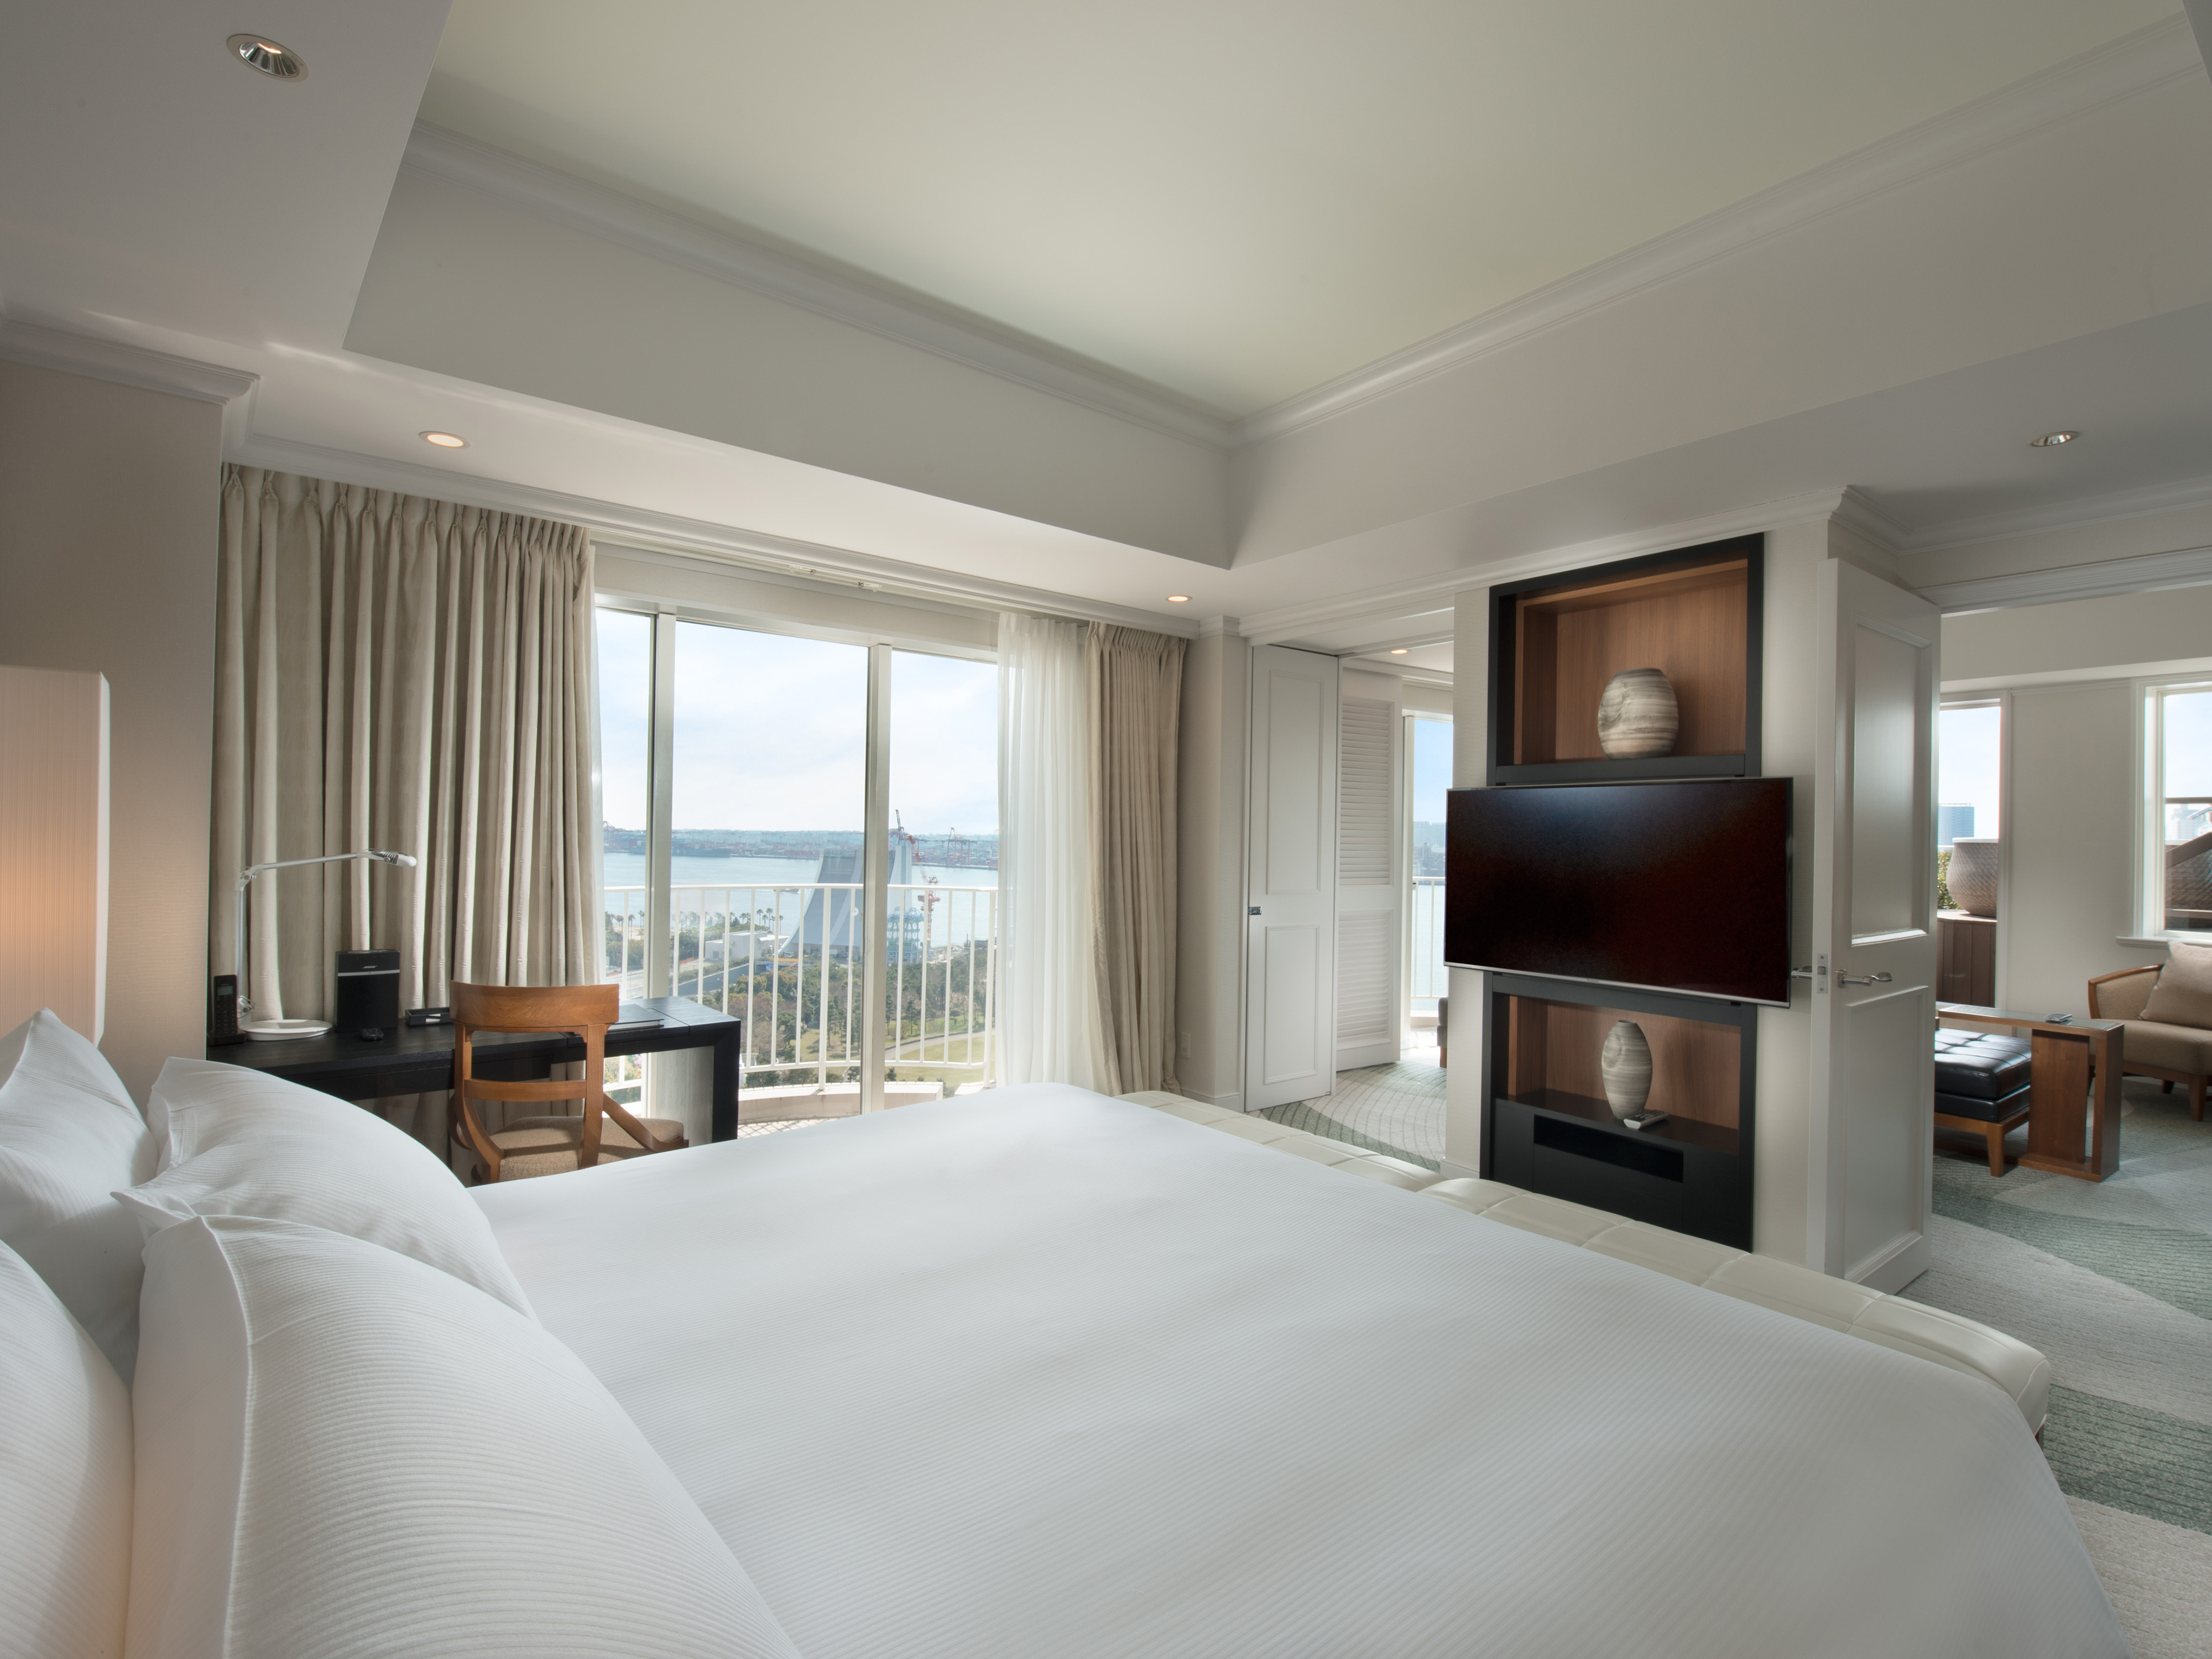 King Terrace Suite Bed View with TV and view of other room